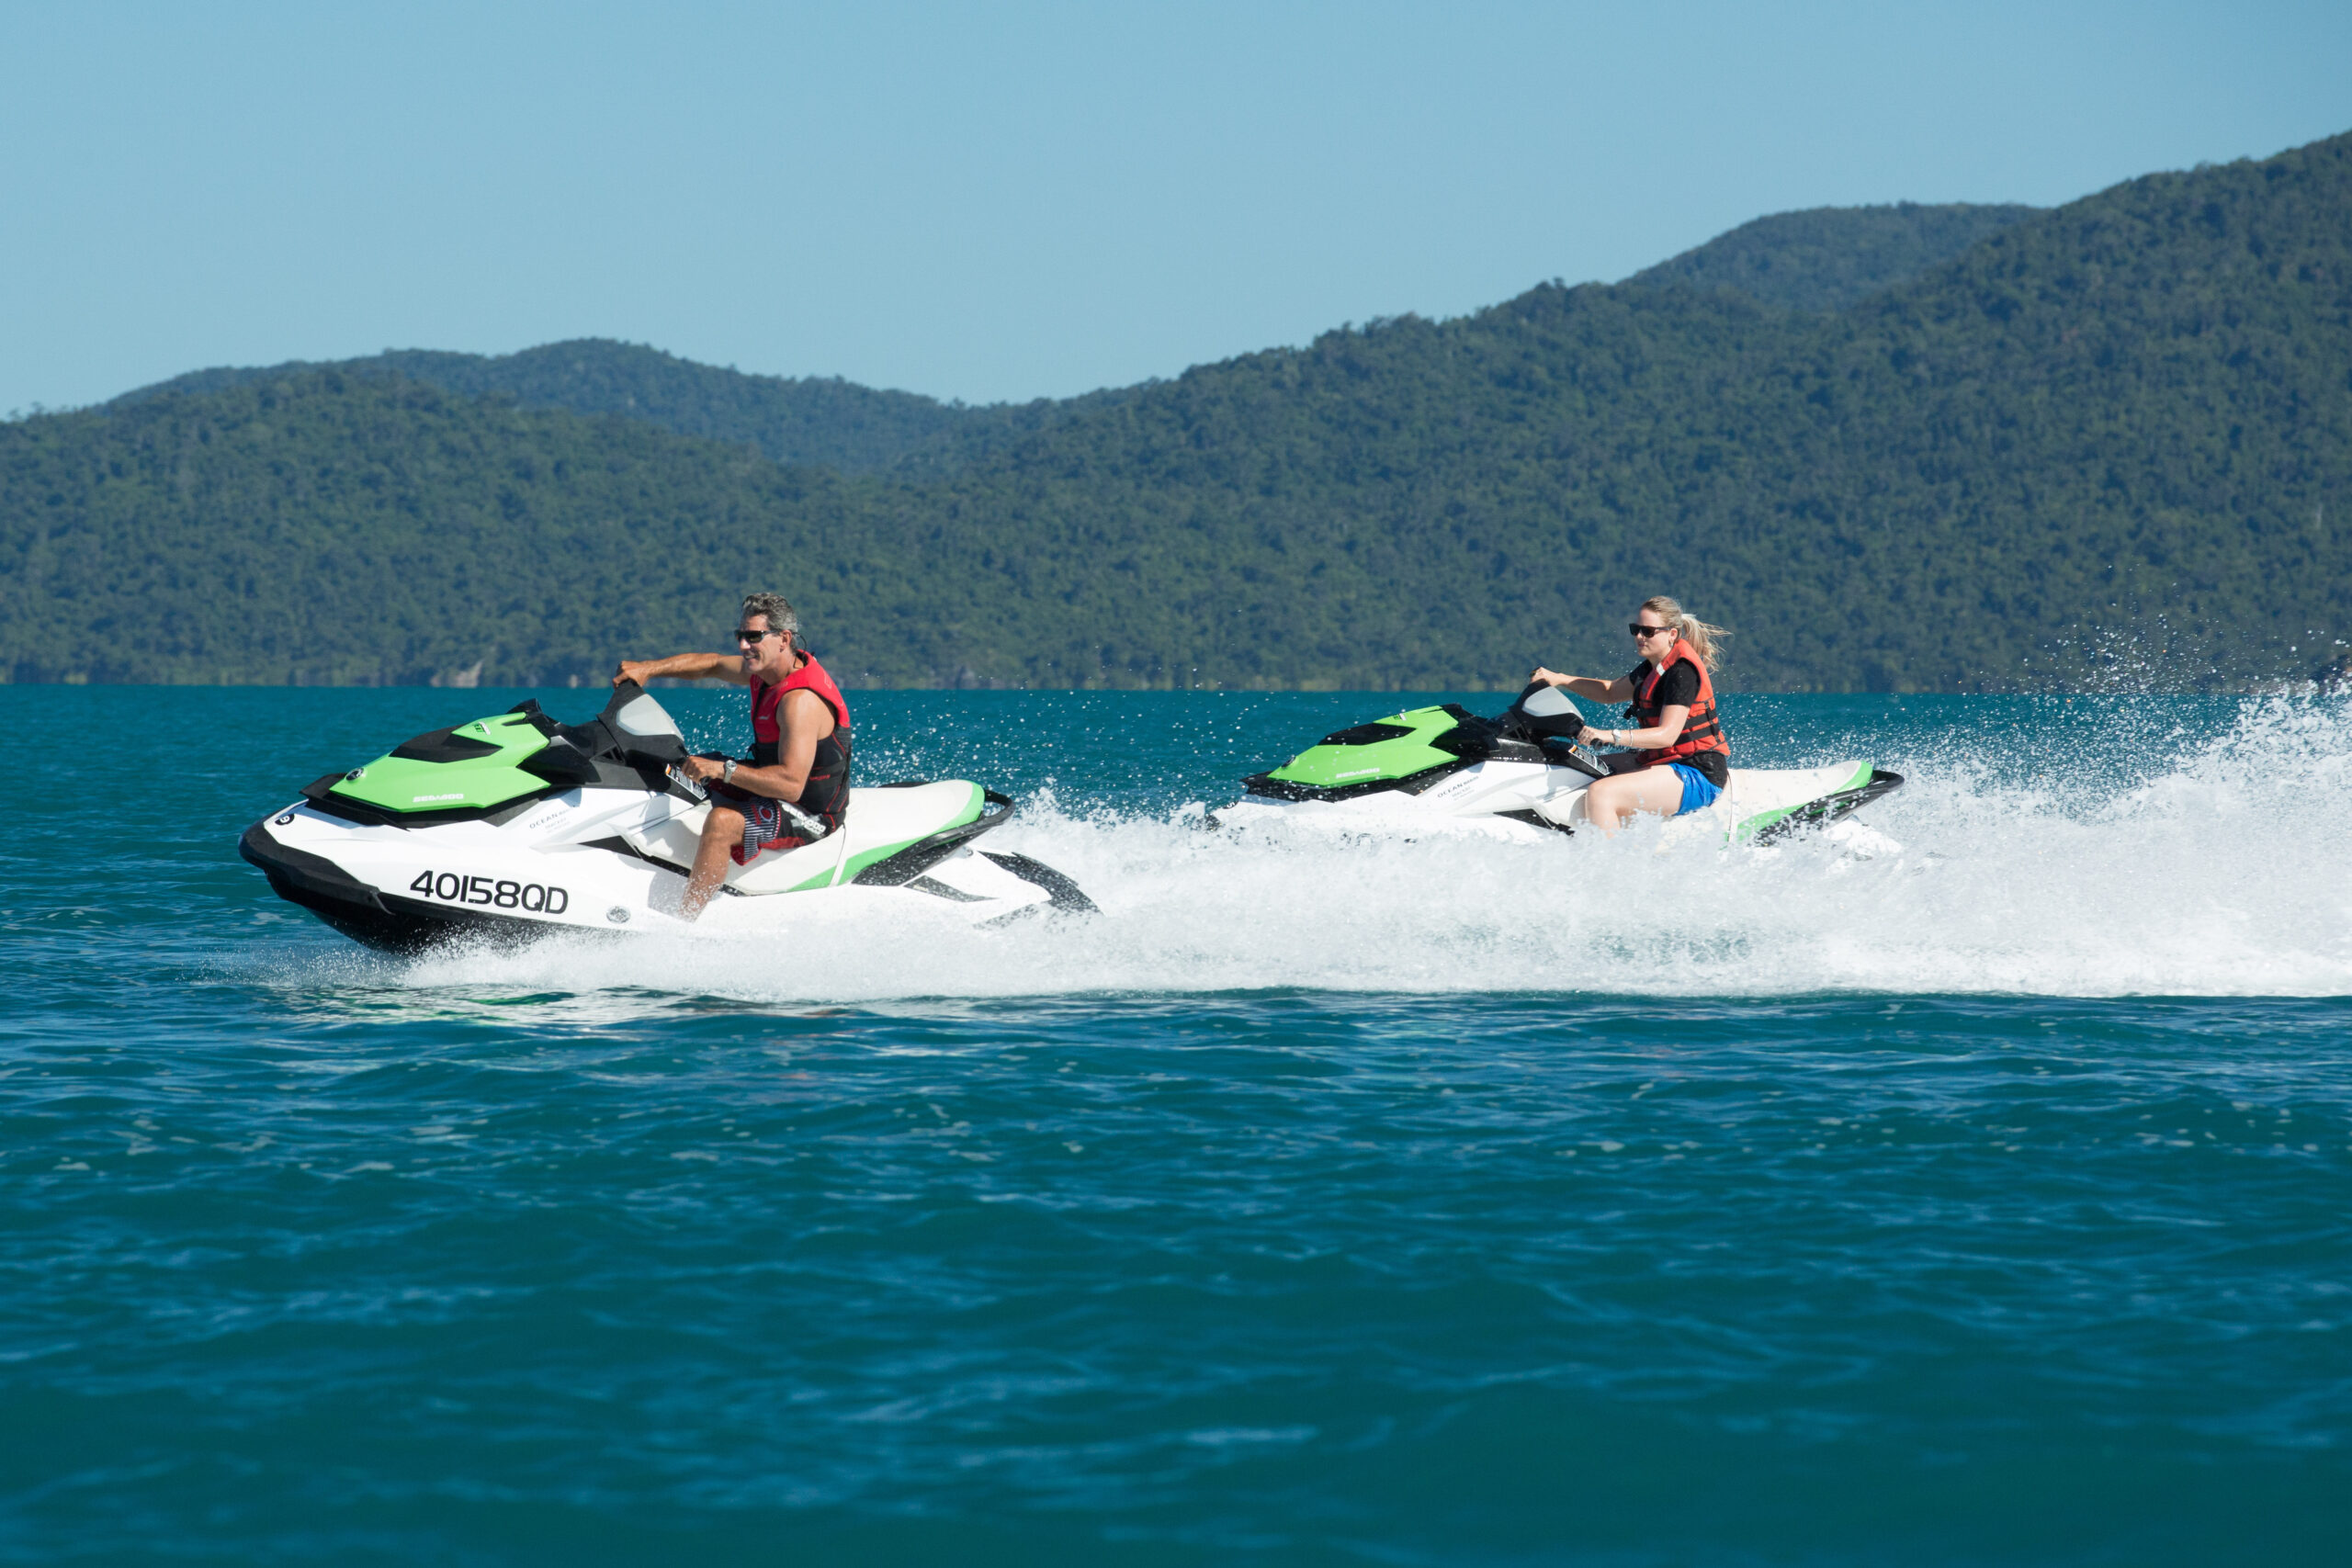 RIDE AND RAFT COMBO 2 - JETSKI AND OCEAN RAFTING PACKAGE